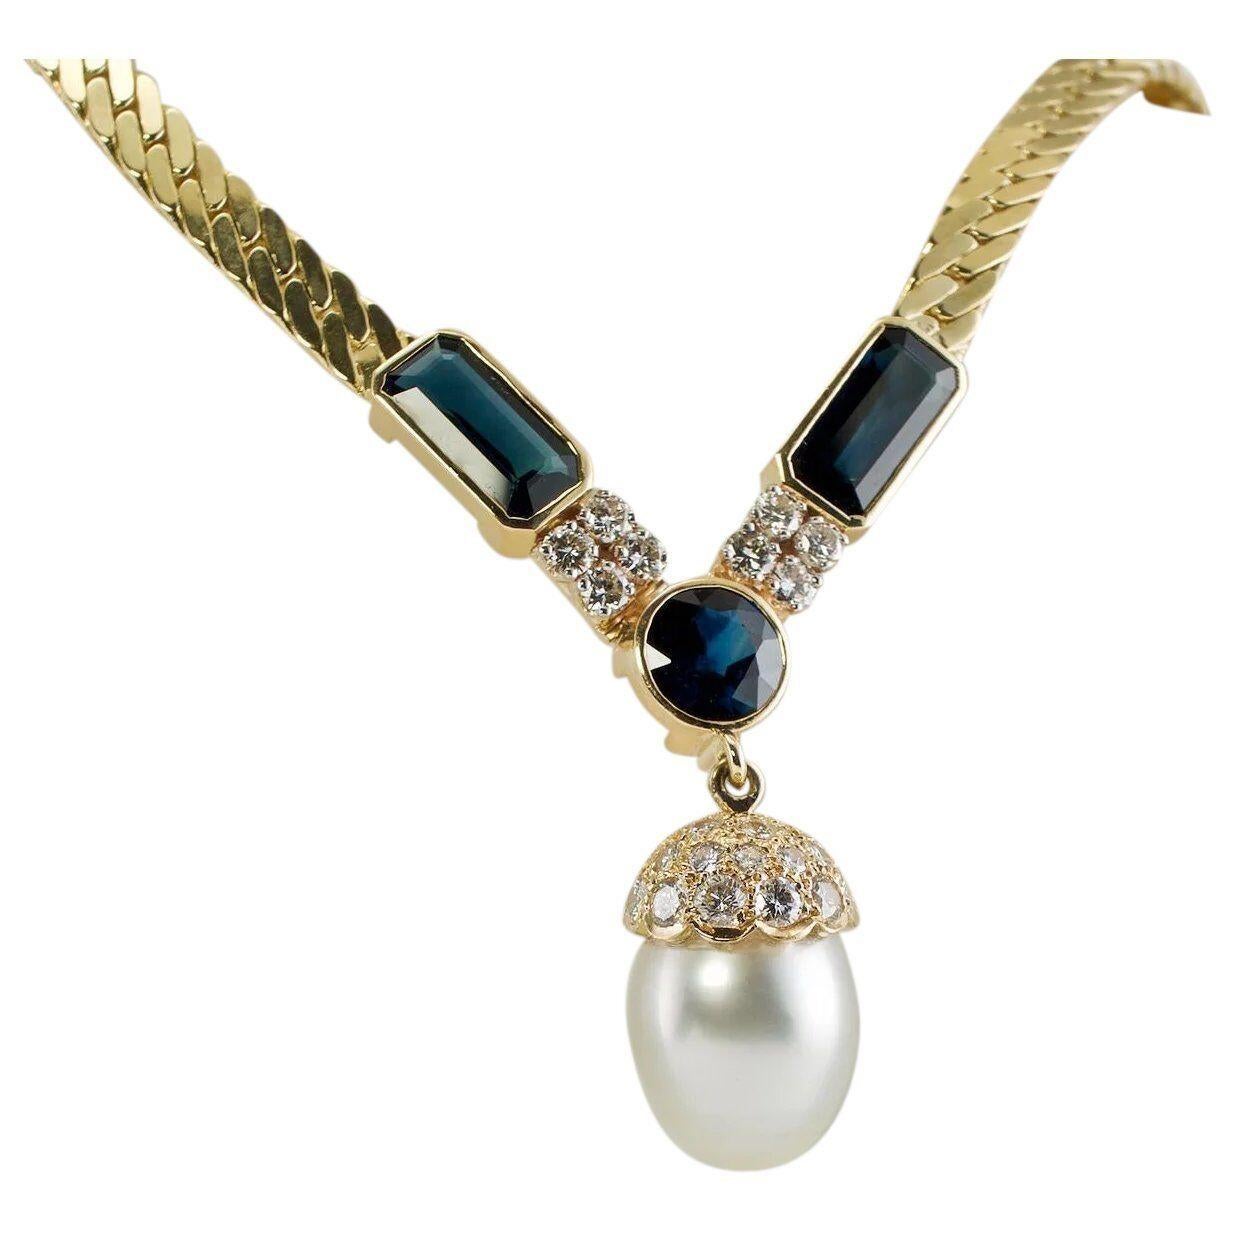 Sapphire Pearl Diamond Necklace 14K Gold by Uno A Erre Italian

This gorgeous designer necklace is signed 